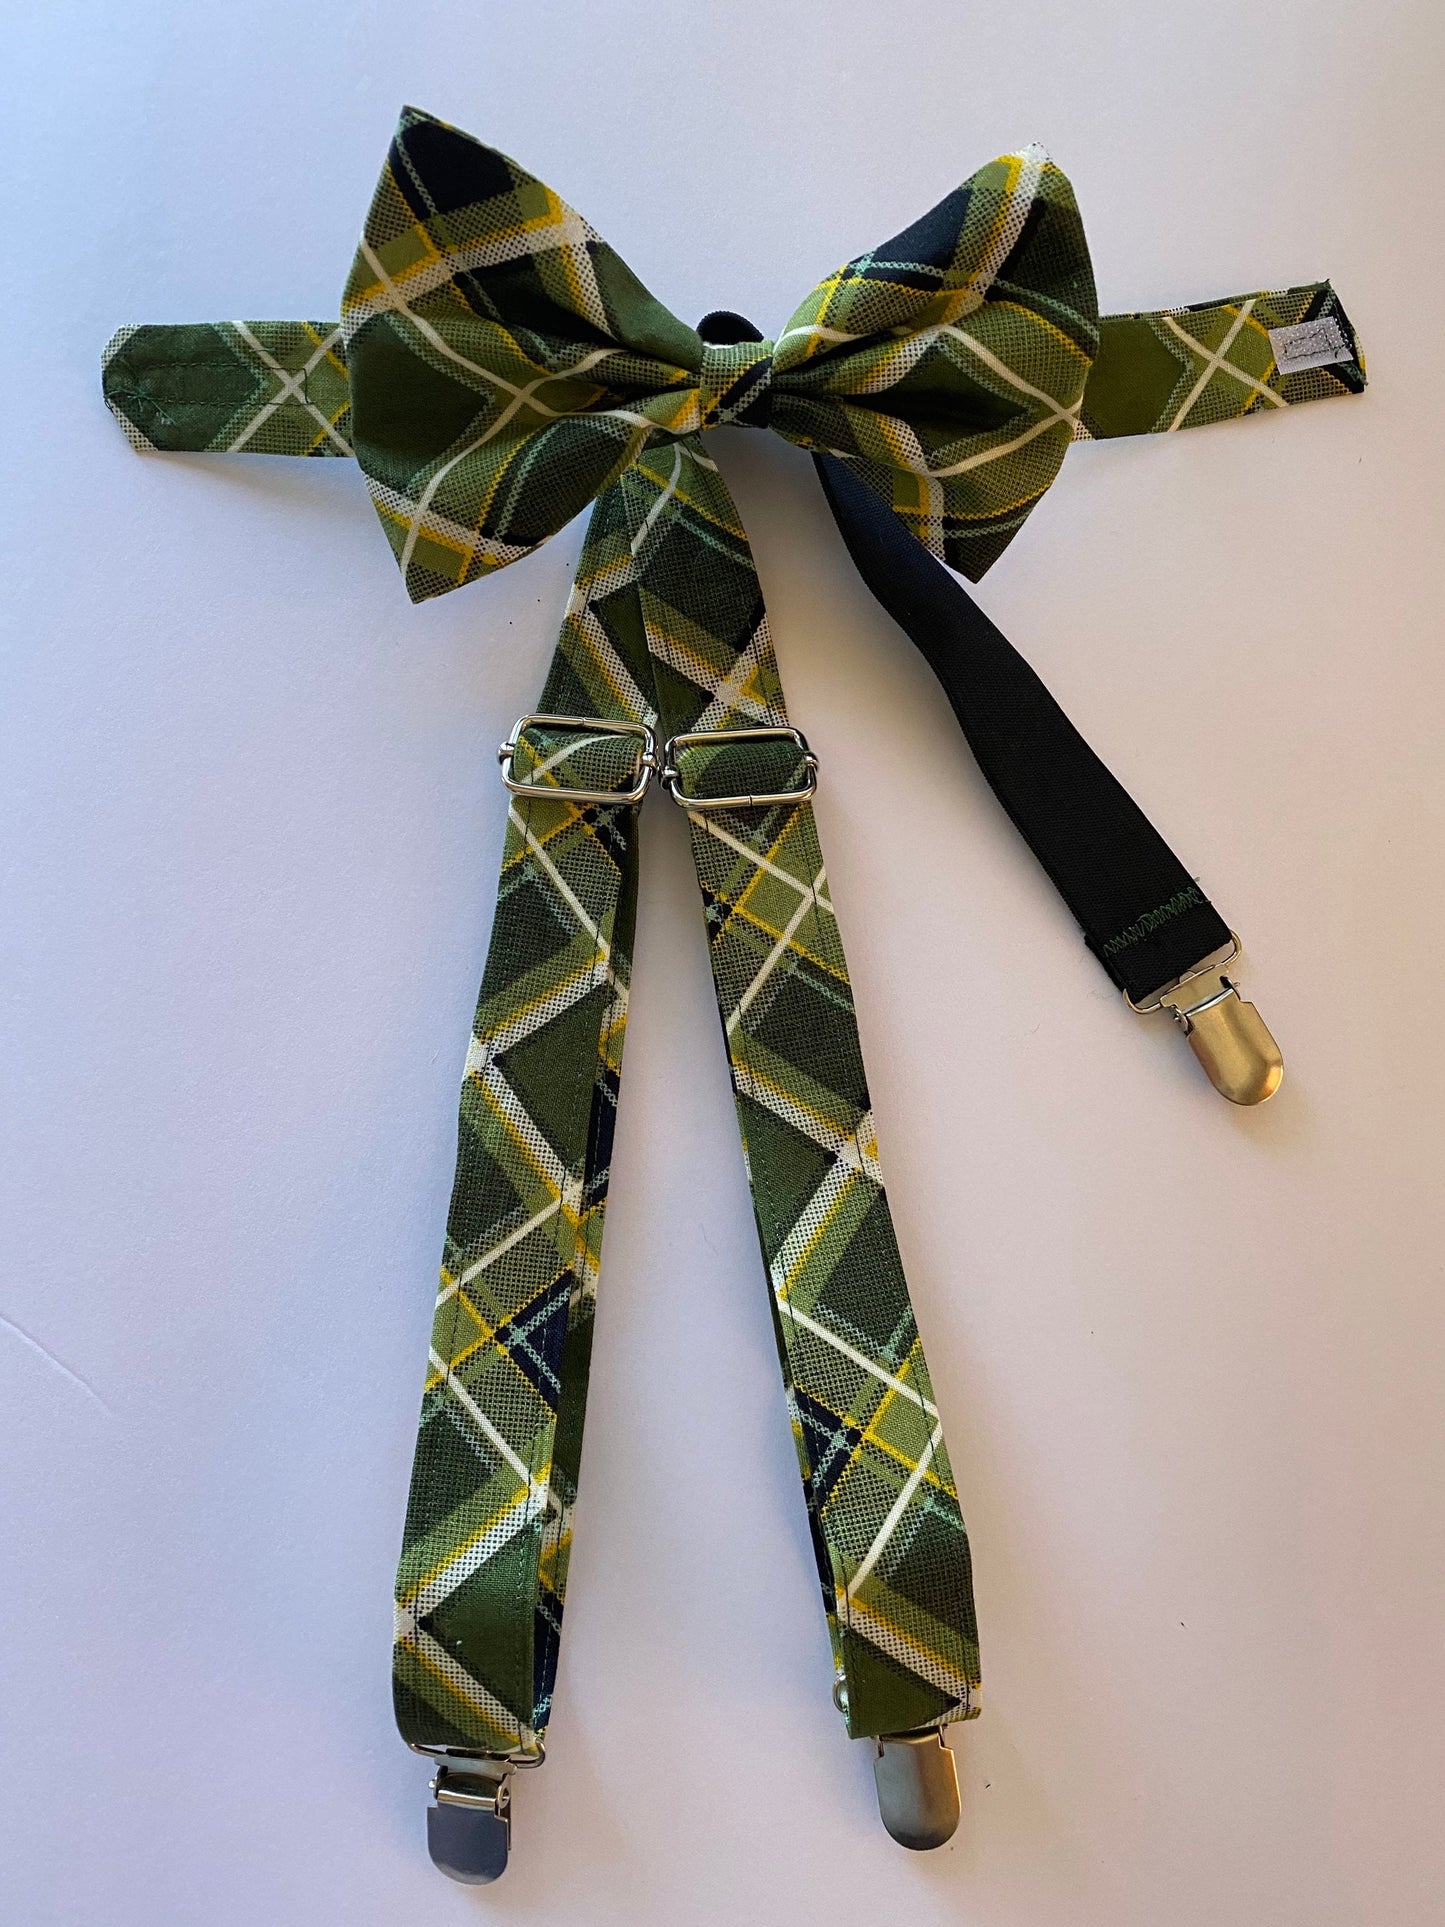 Customized bow tie and suspenders adjustable